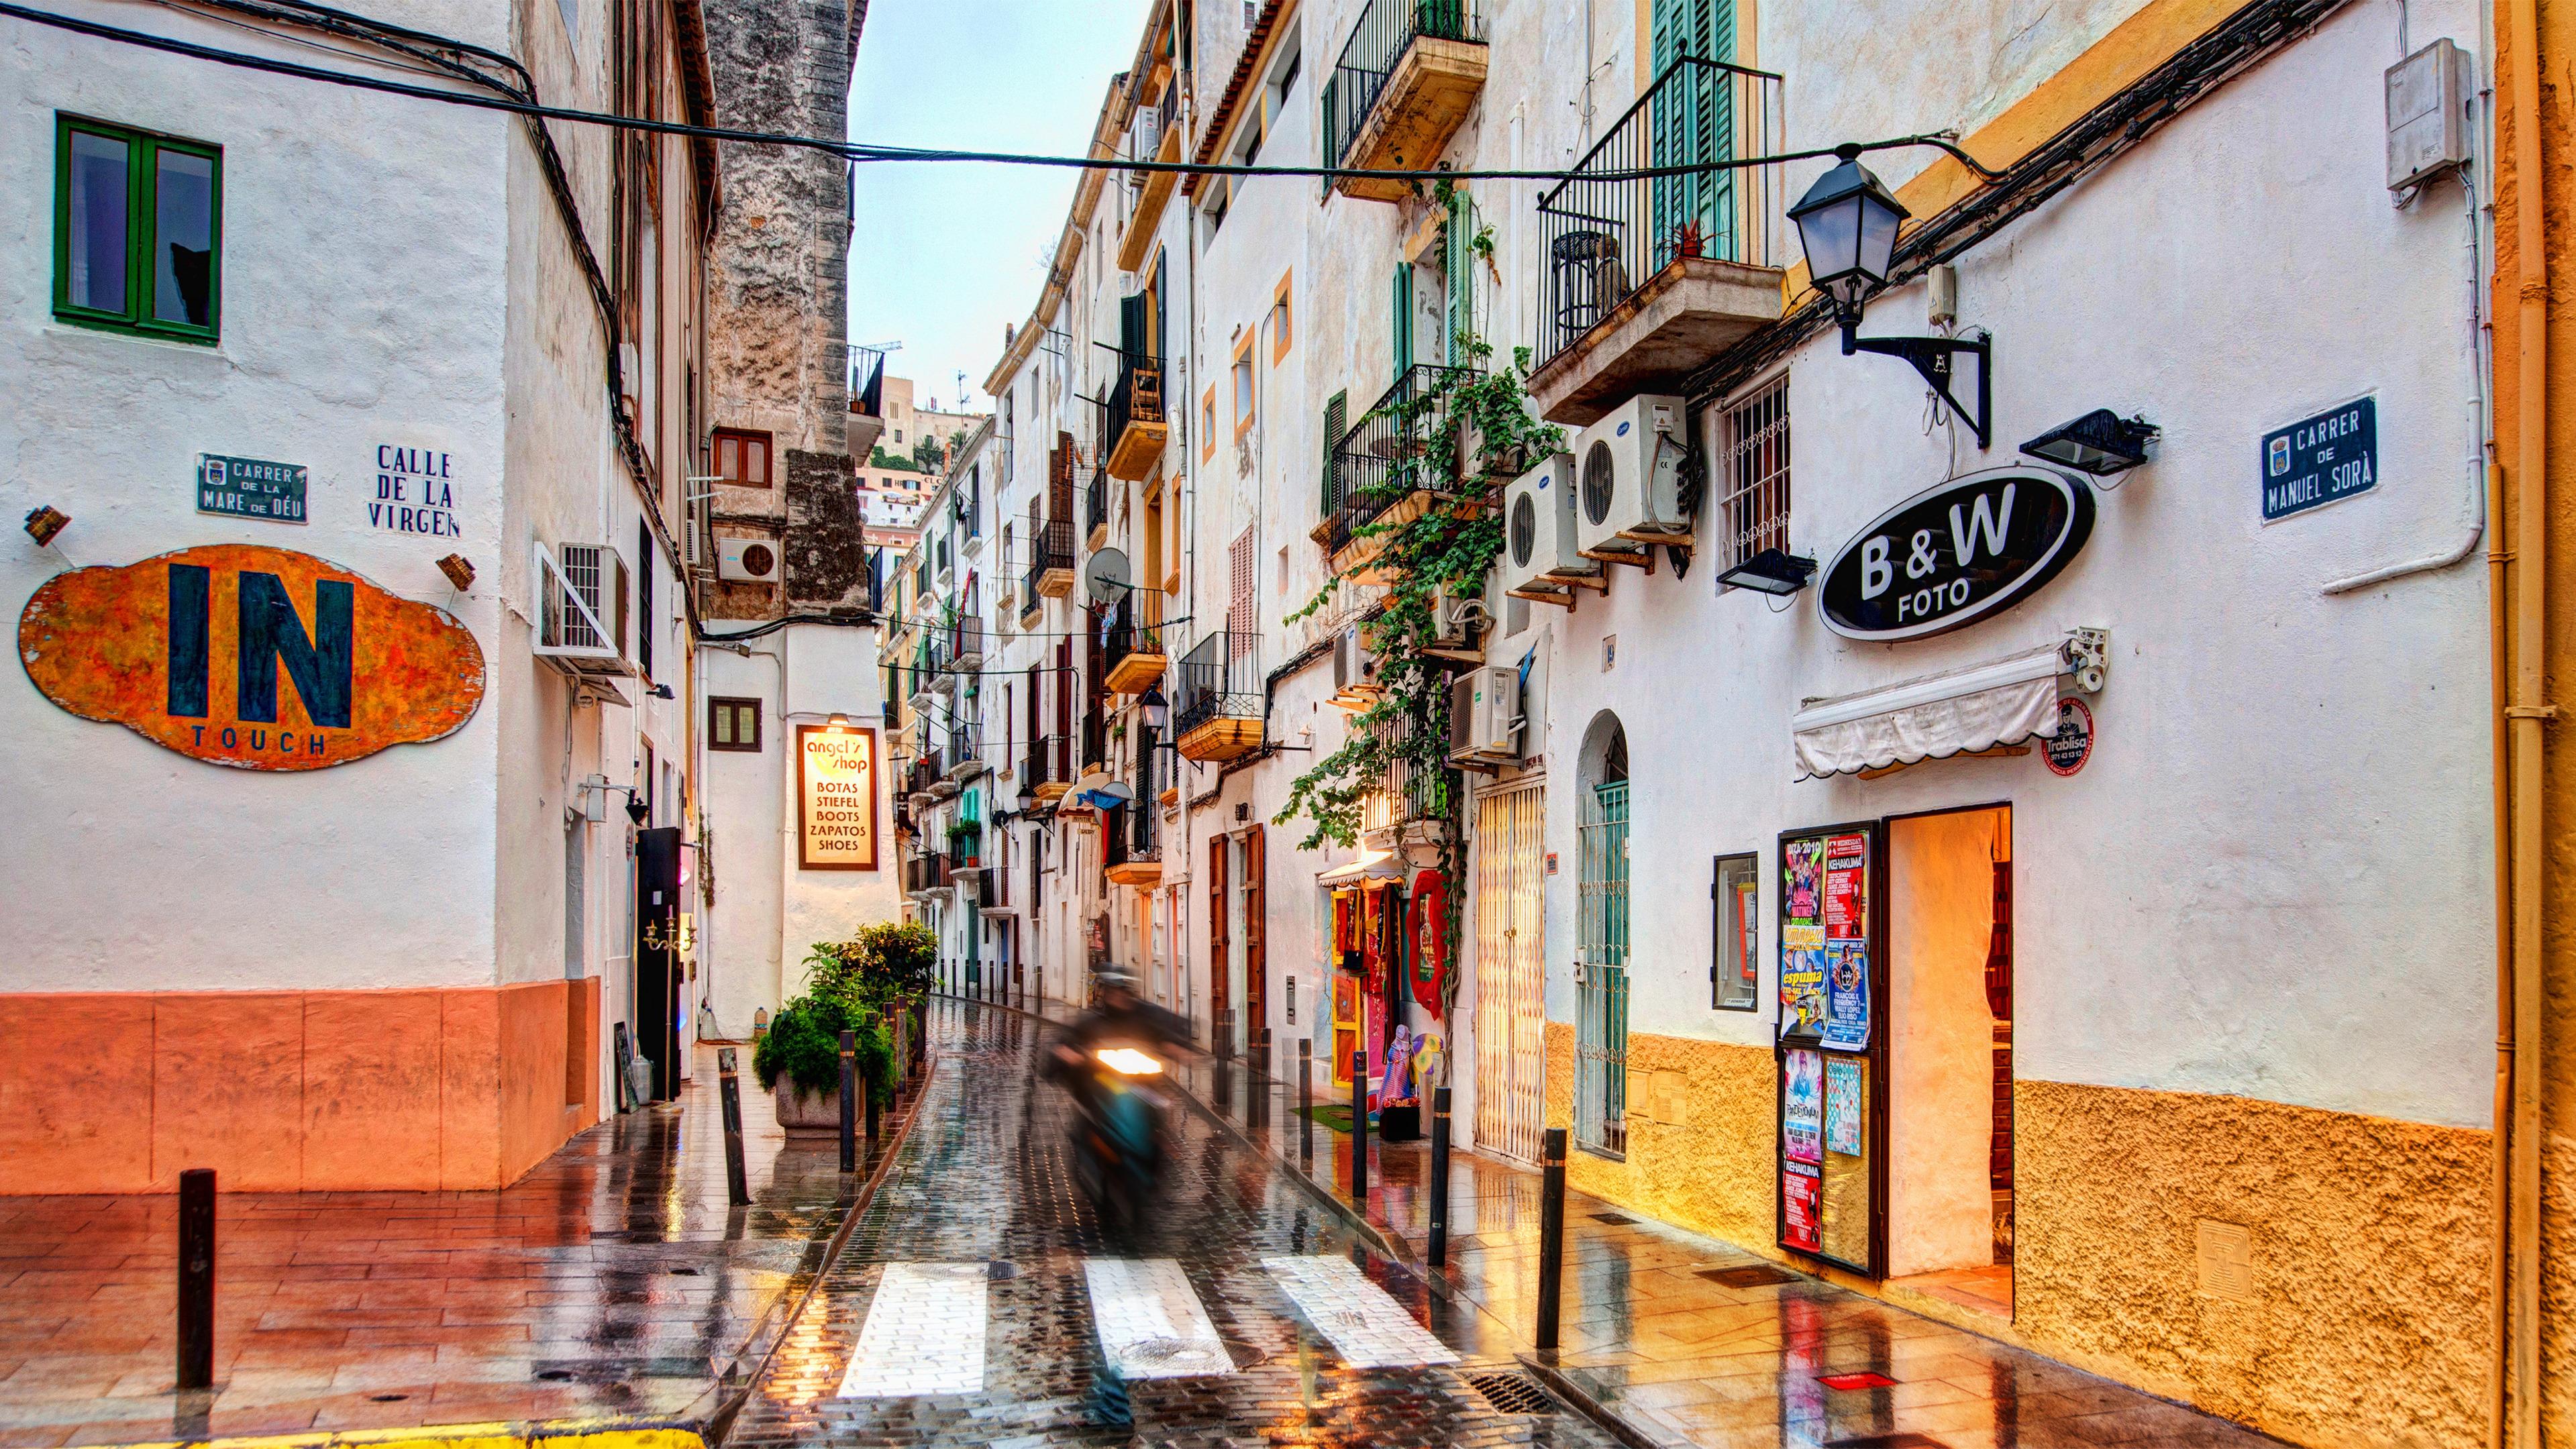 Old Medieval Part of Ibiza Town widescreen wallpaper. Wide